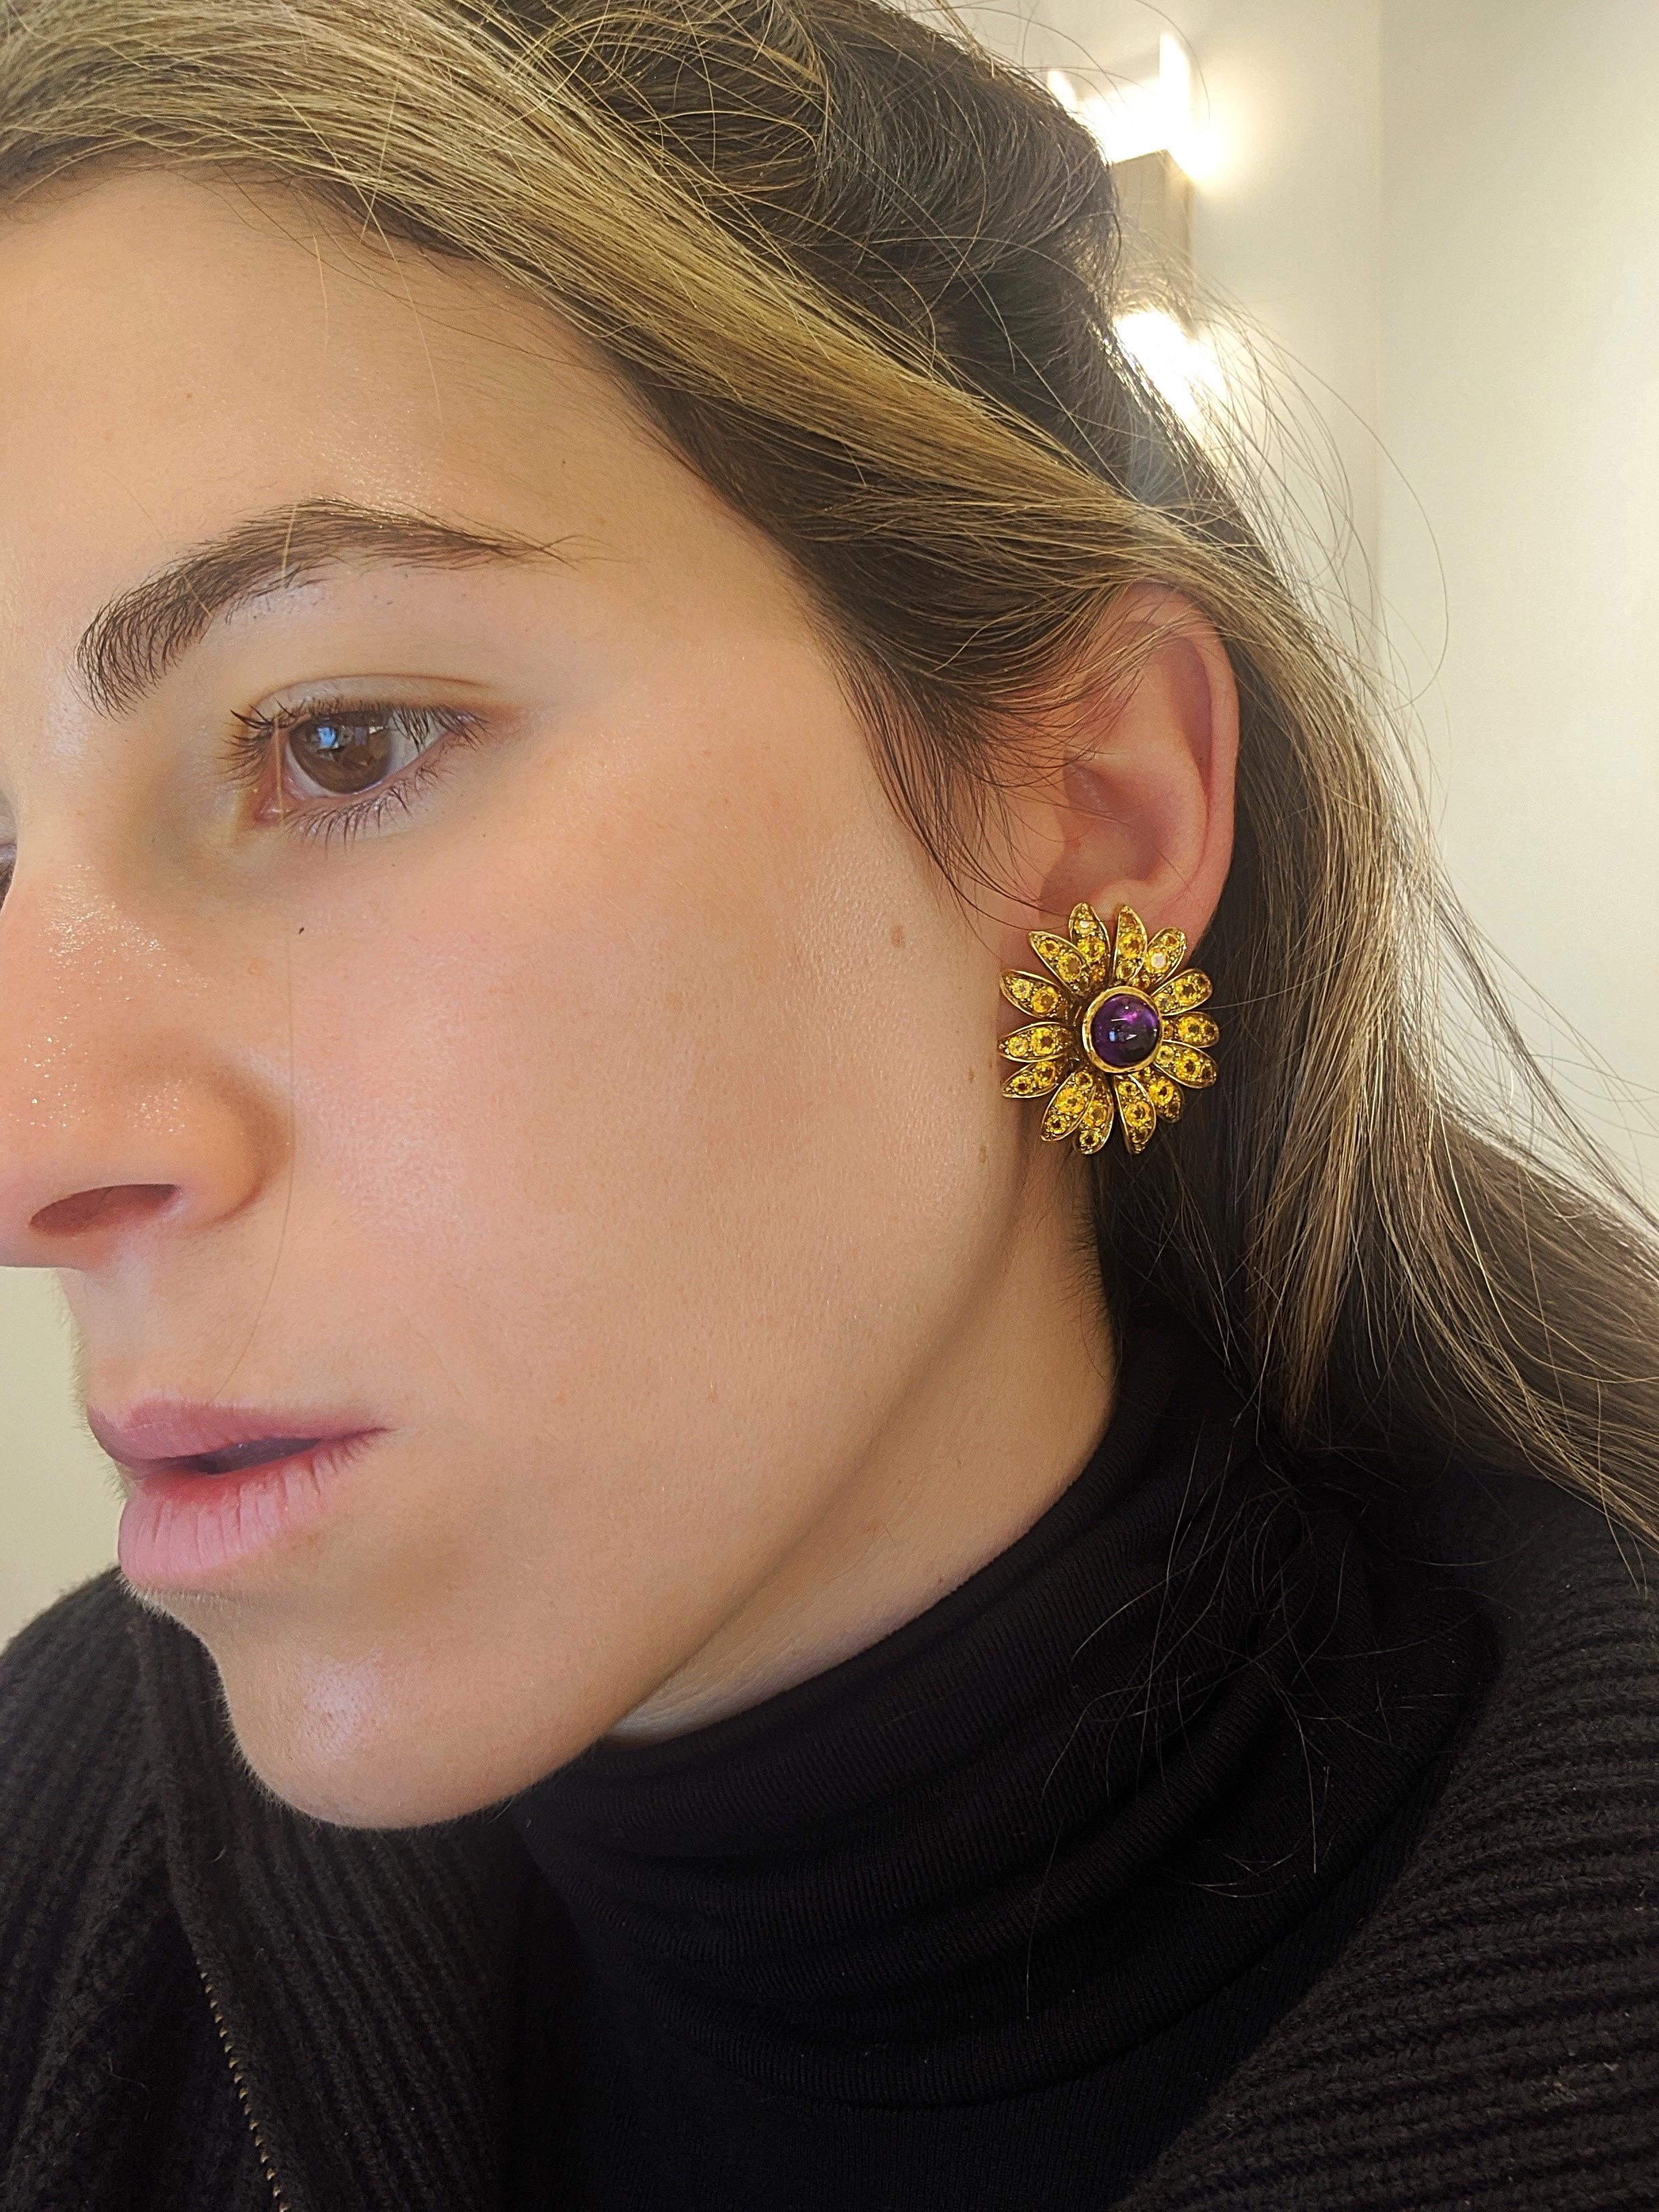 Jean Vitau 18 Karat Yellow Gold Sunflower Earrings Yellow Sapphires and Amethyst In New Condition For Sale In New York, NY